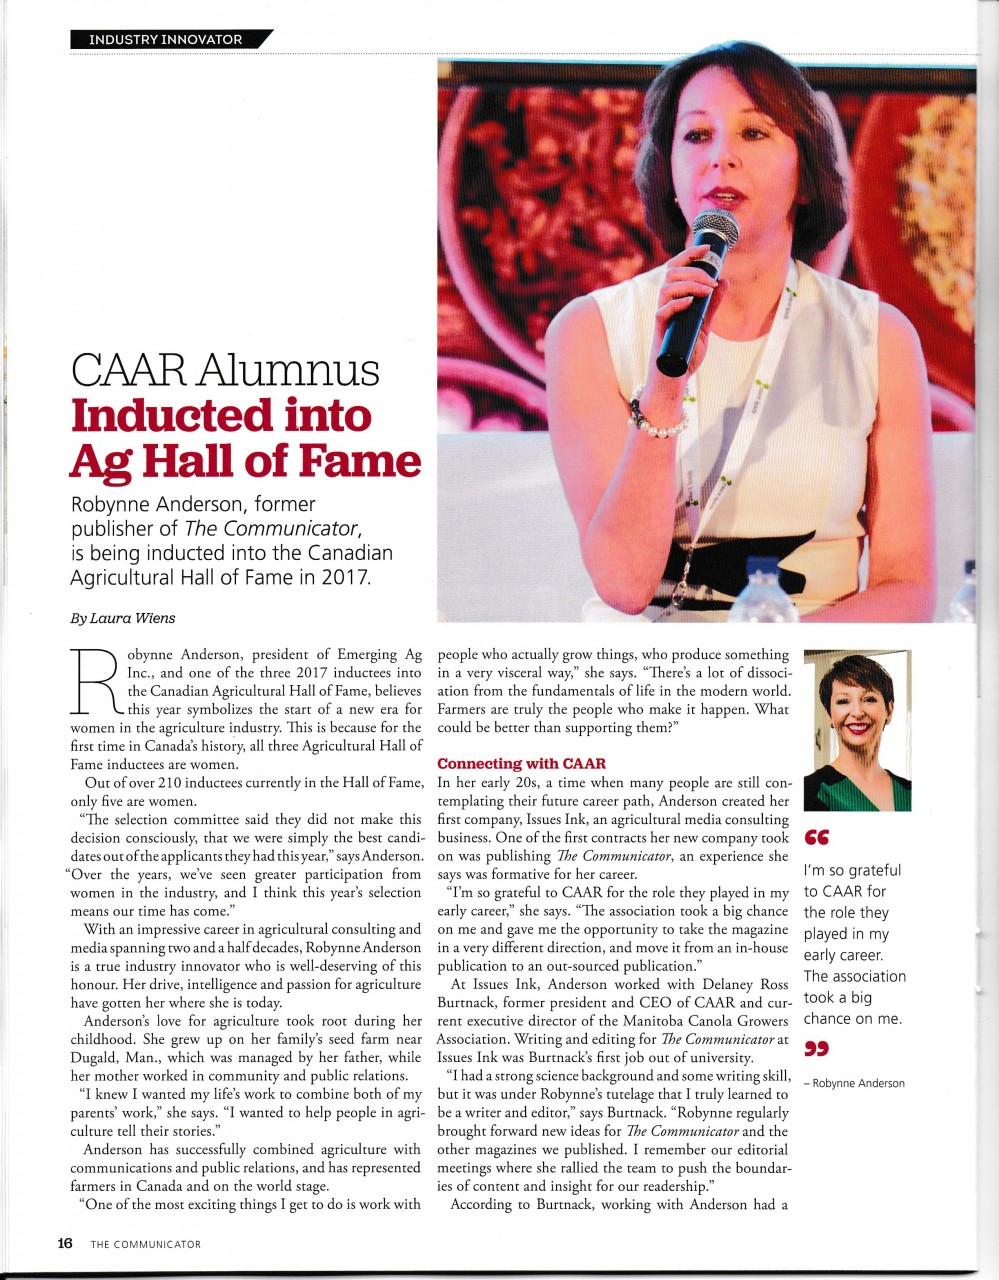 The Communicator highlights induction into Ag Hall of Fame